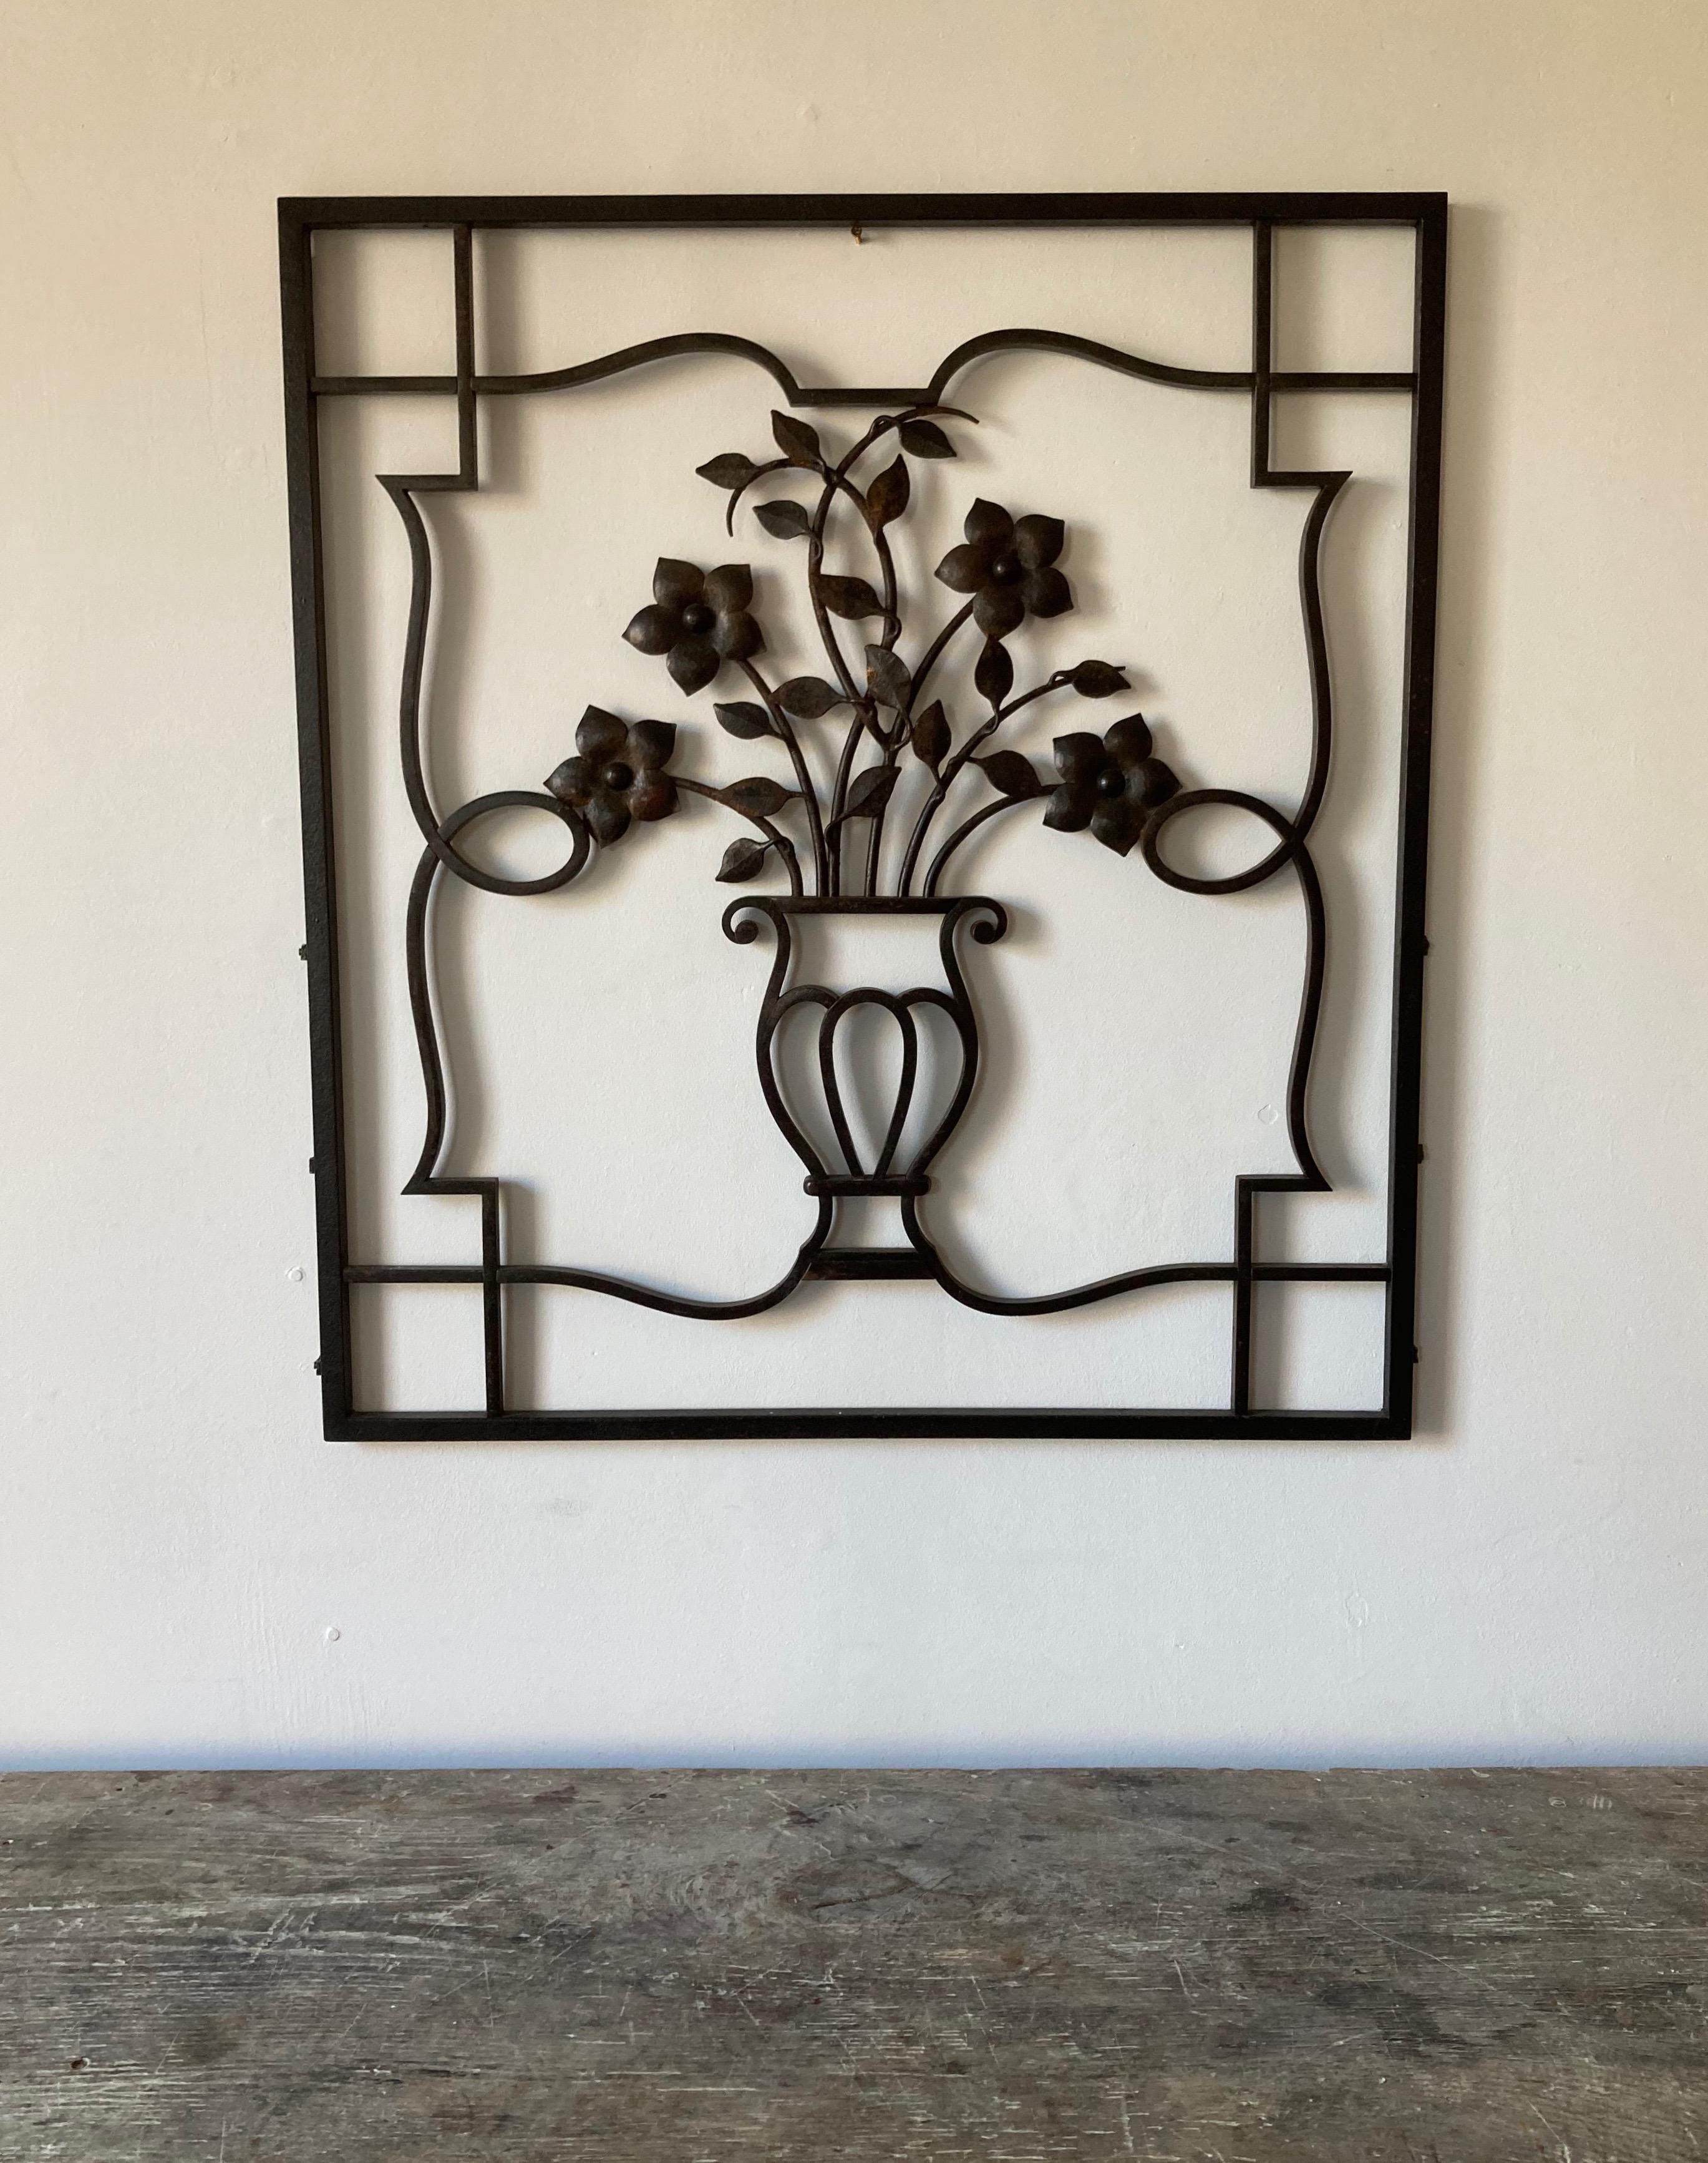 French Provincial French Decorative Iron Wall Sculpture or Applique, Urn and Floral Motif For Sale